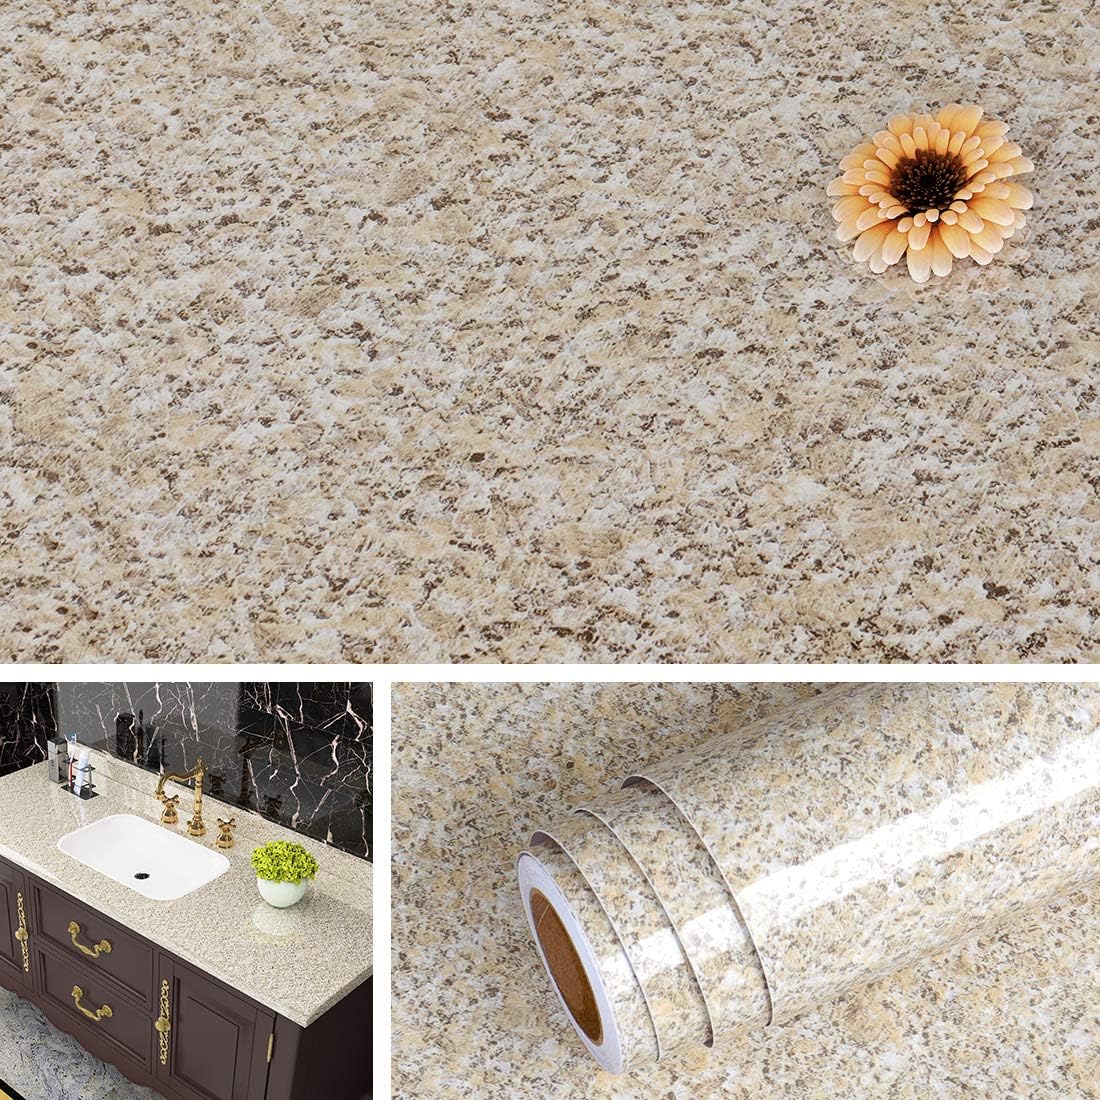 Livelynine Contact Paper for Countertops Granite Wall [...]